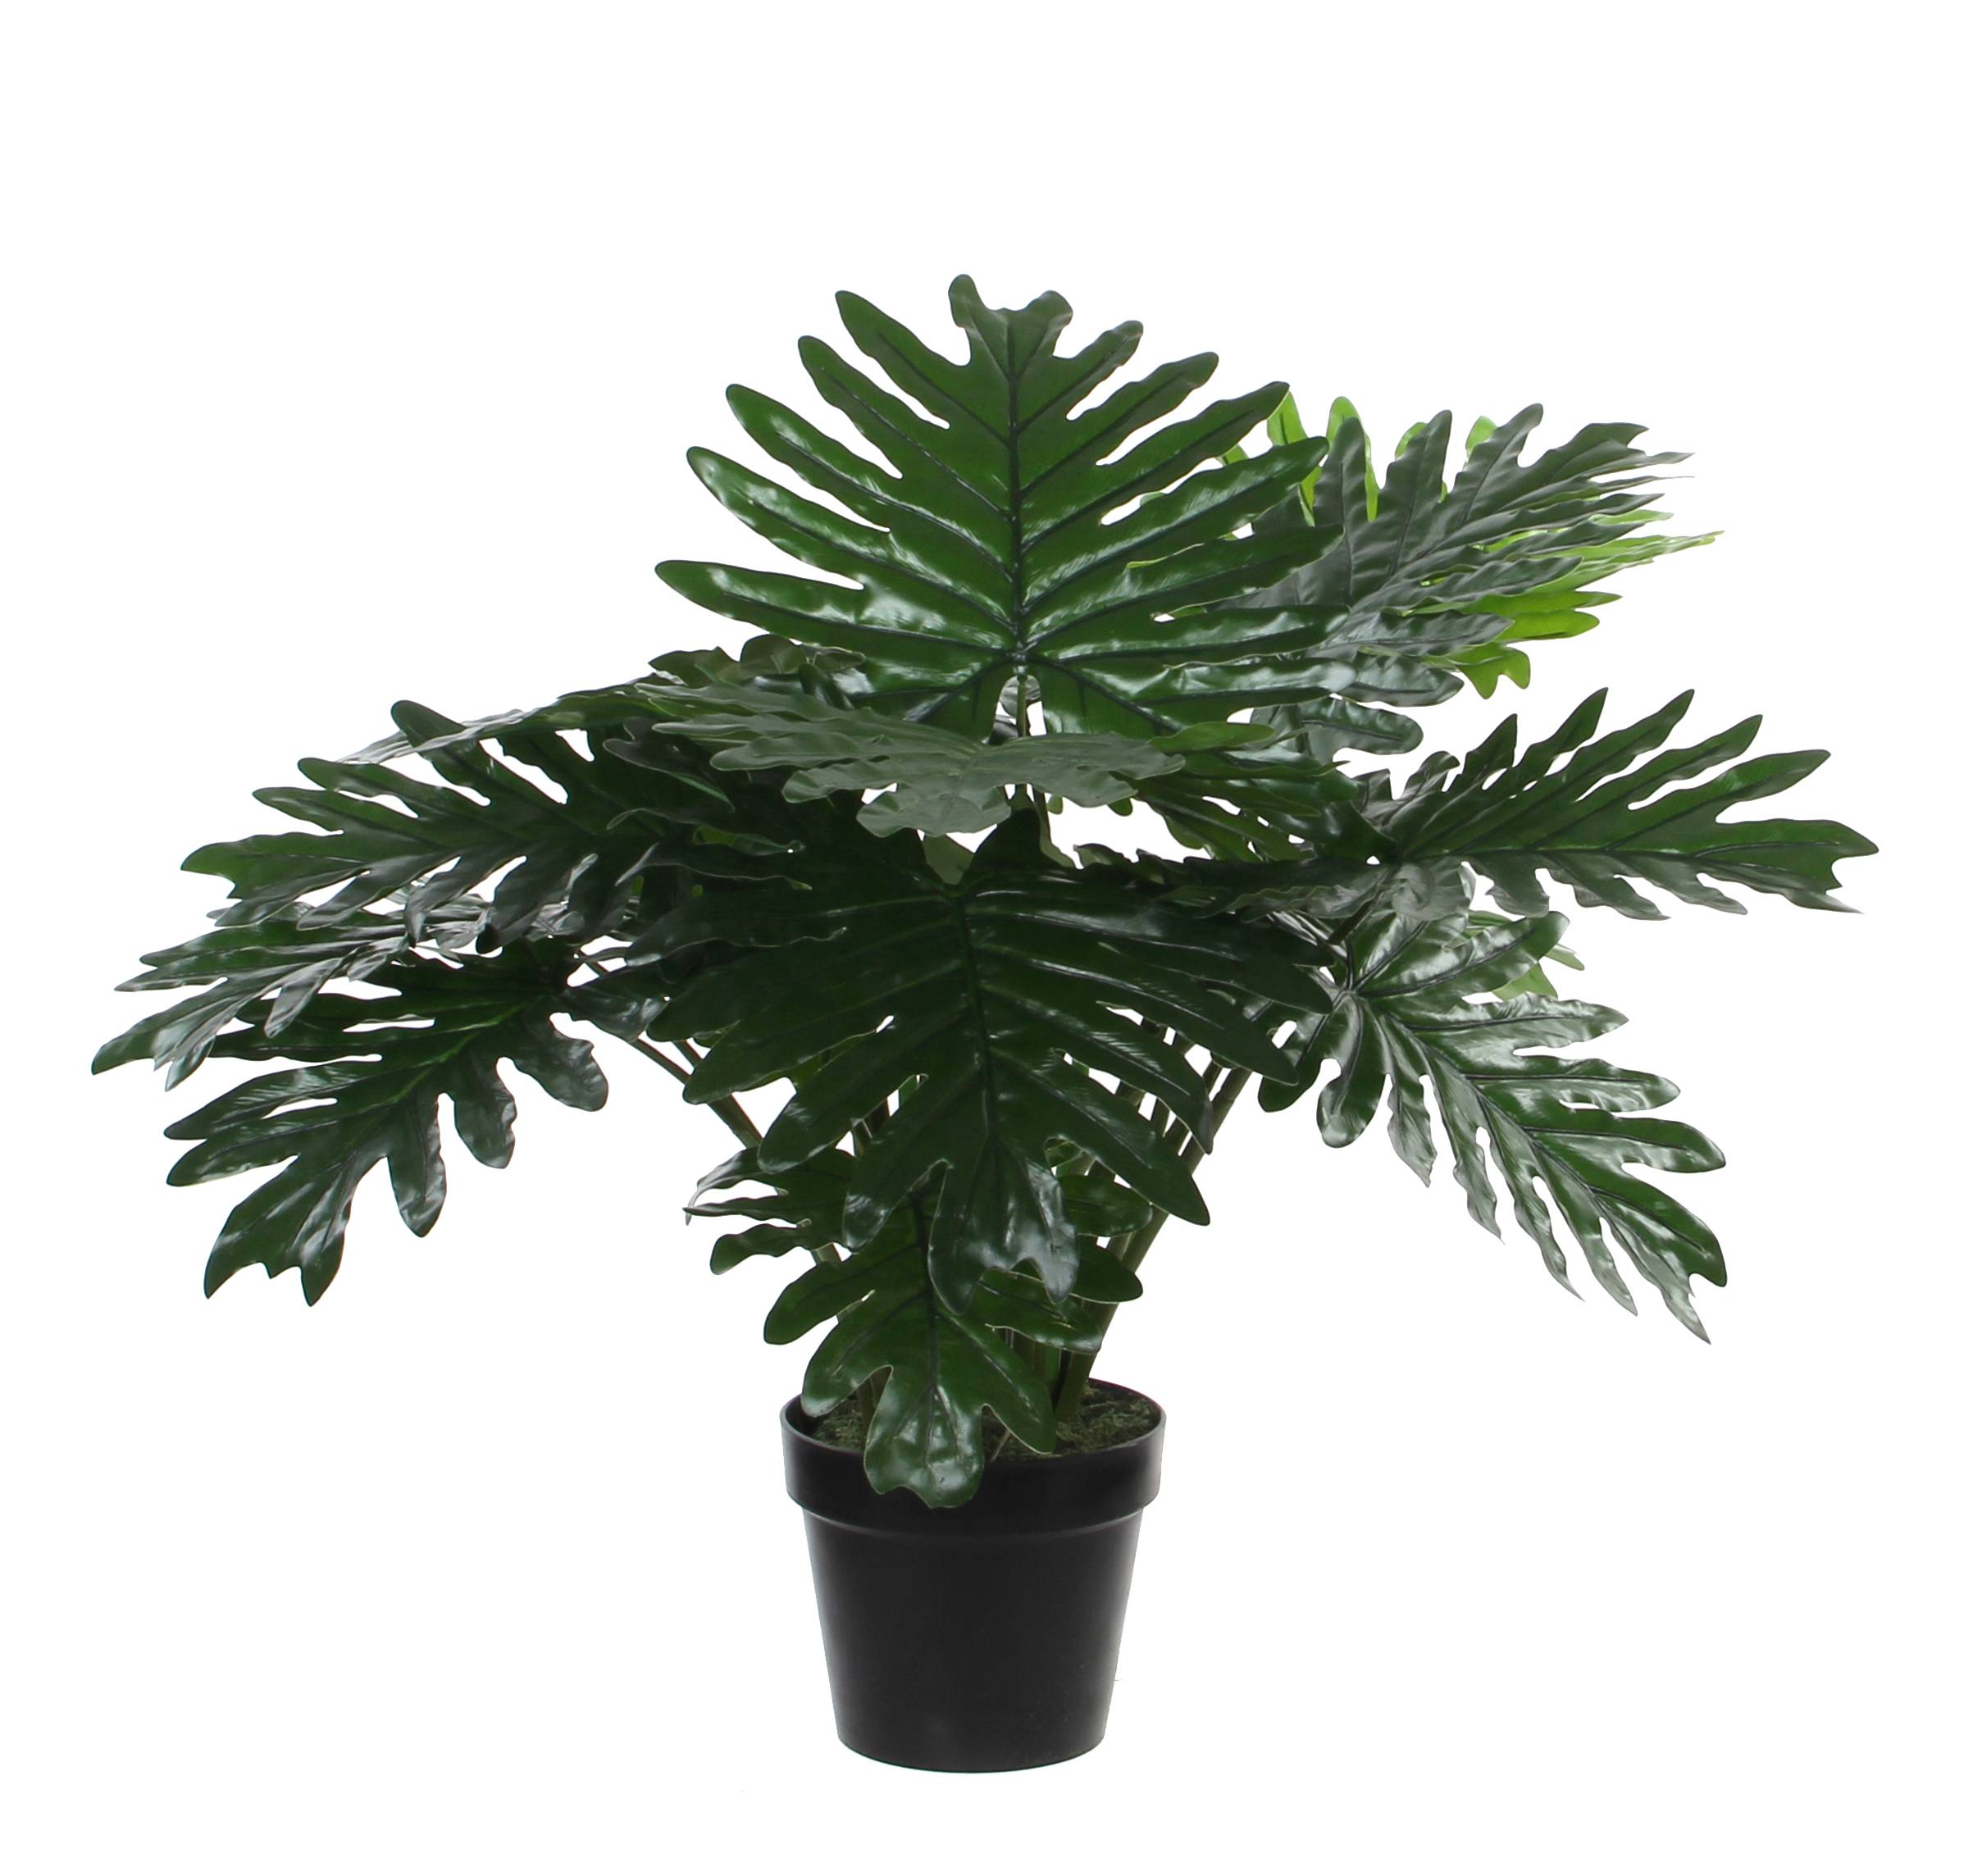 Kunstpflanze Philodendron home24 | kaufen